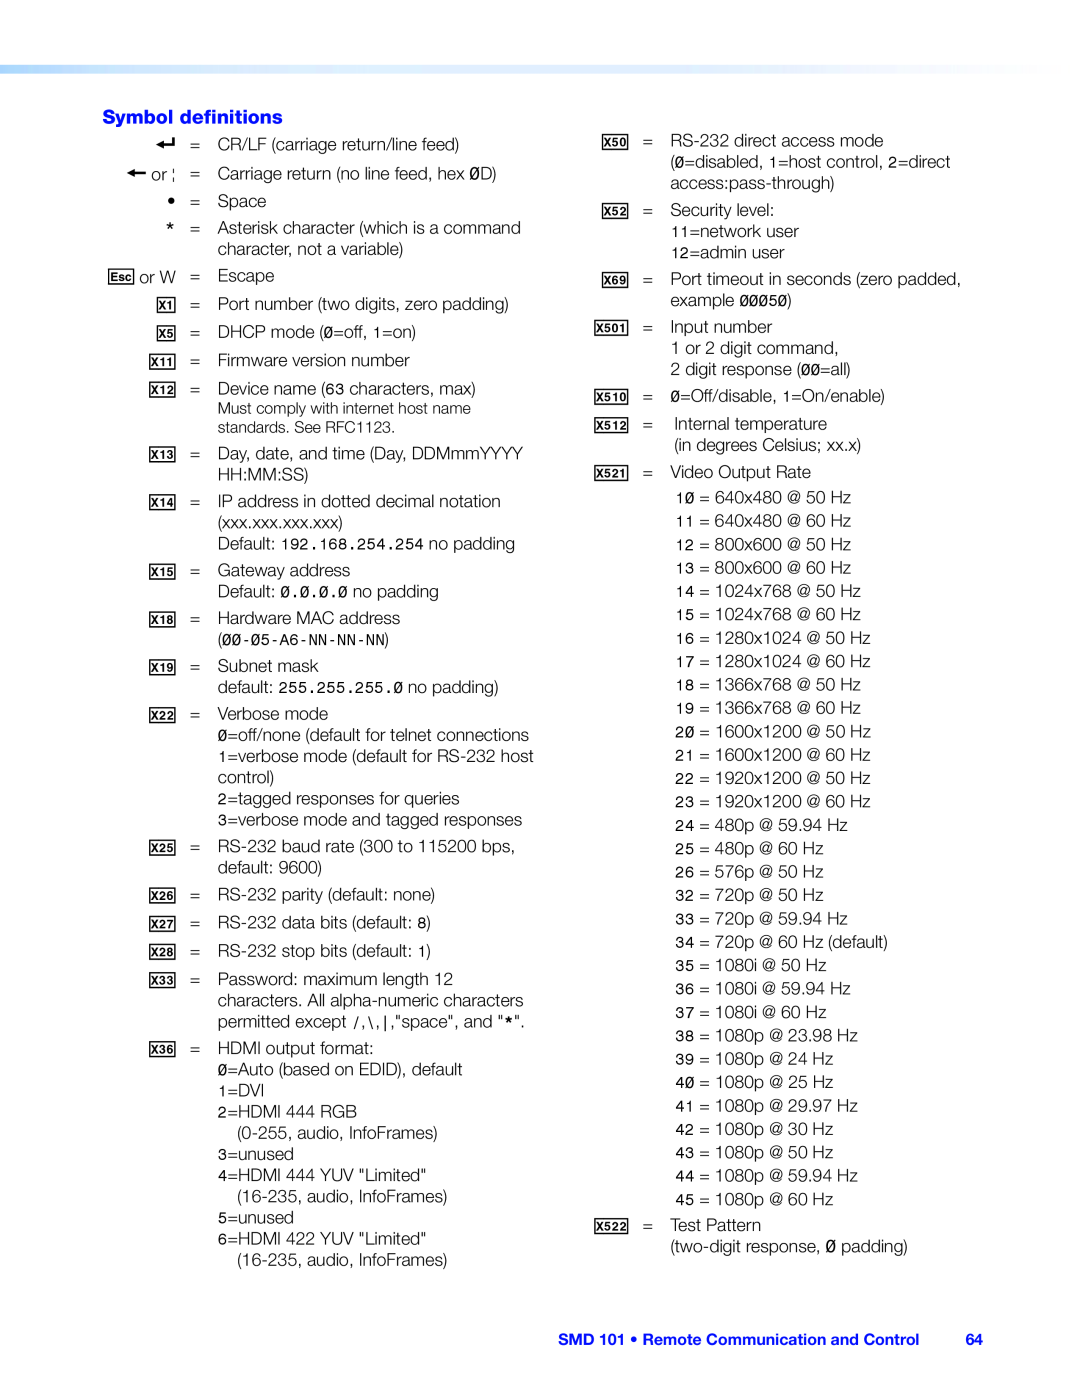 Extron electronic SMD 101 manual Symbol definitions 